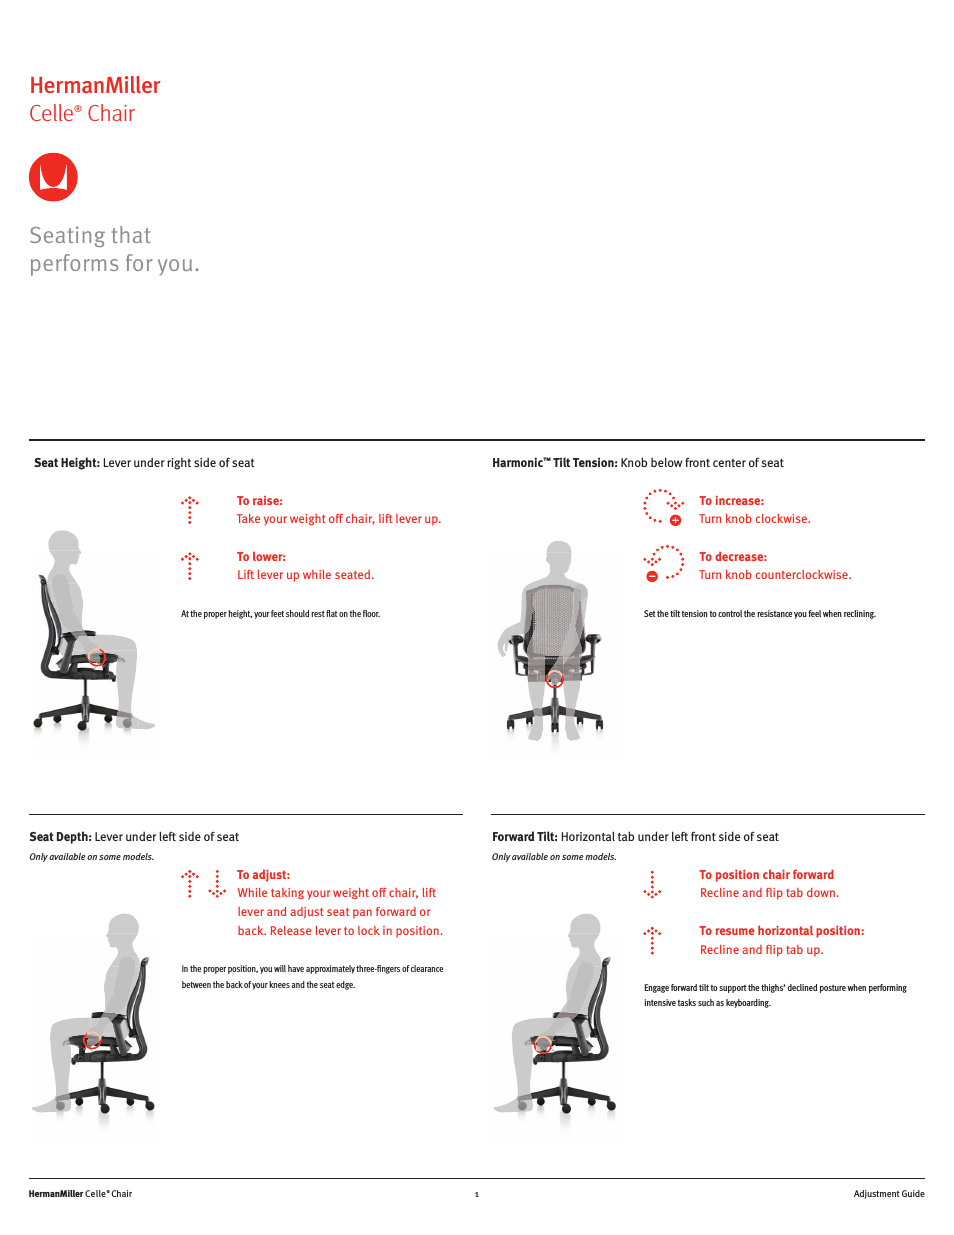 Celle Chairs - User Adjustments